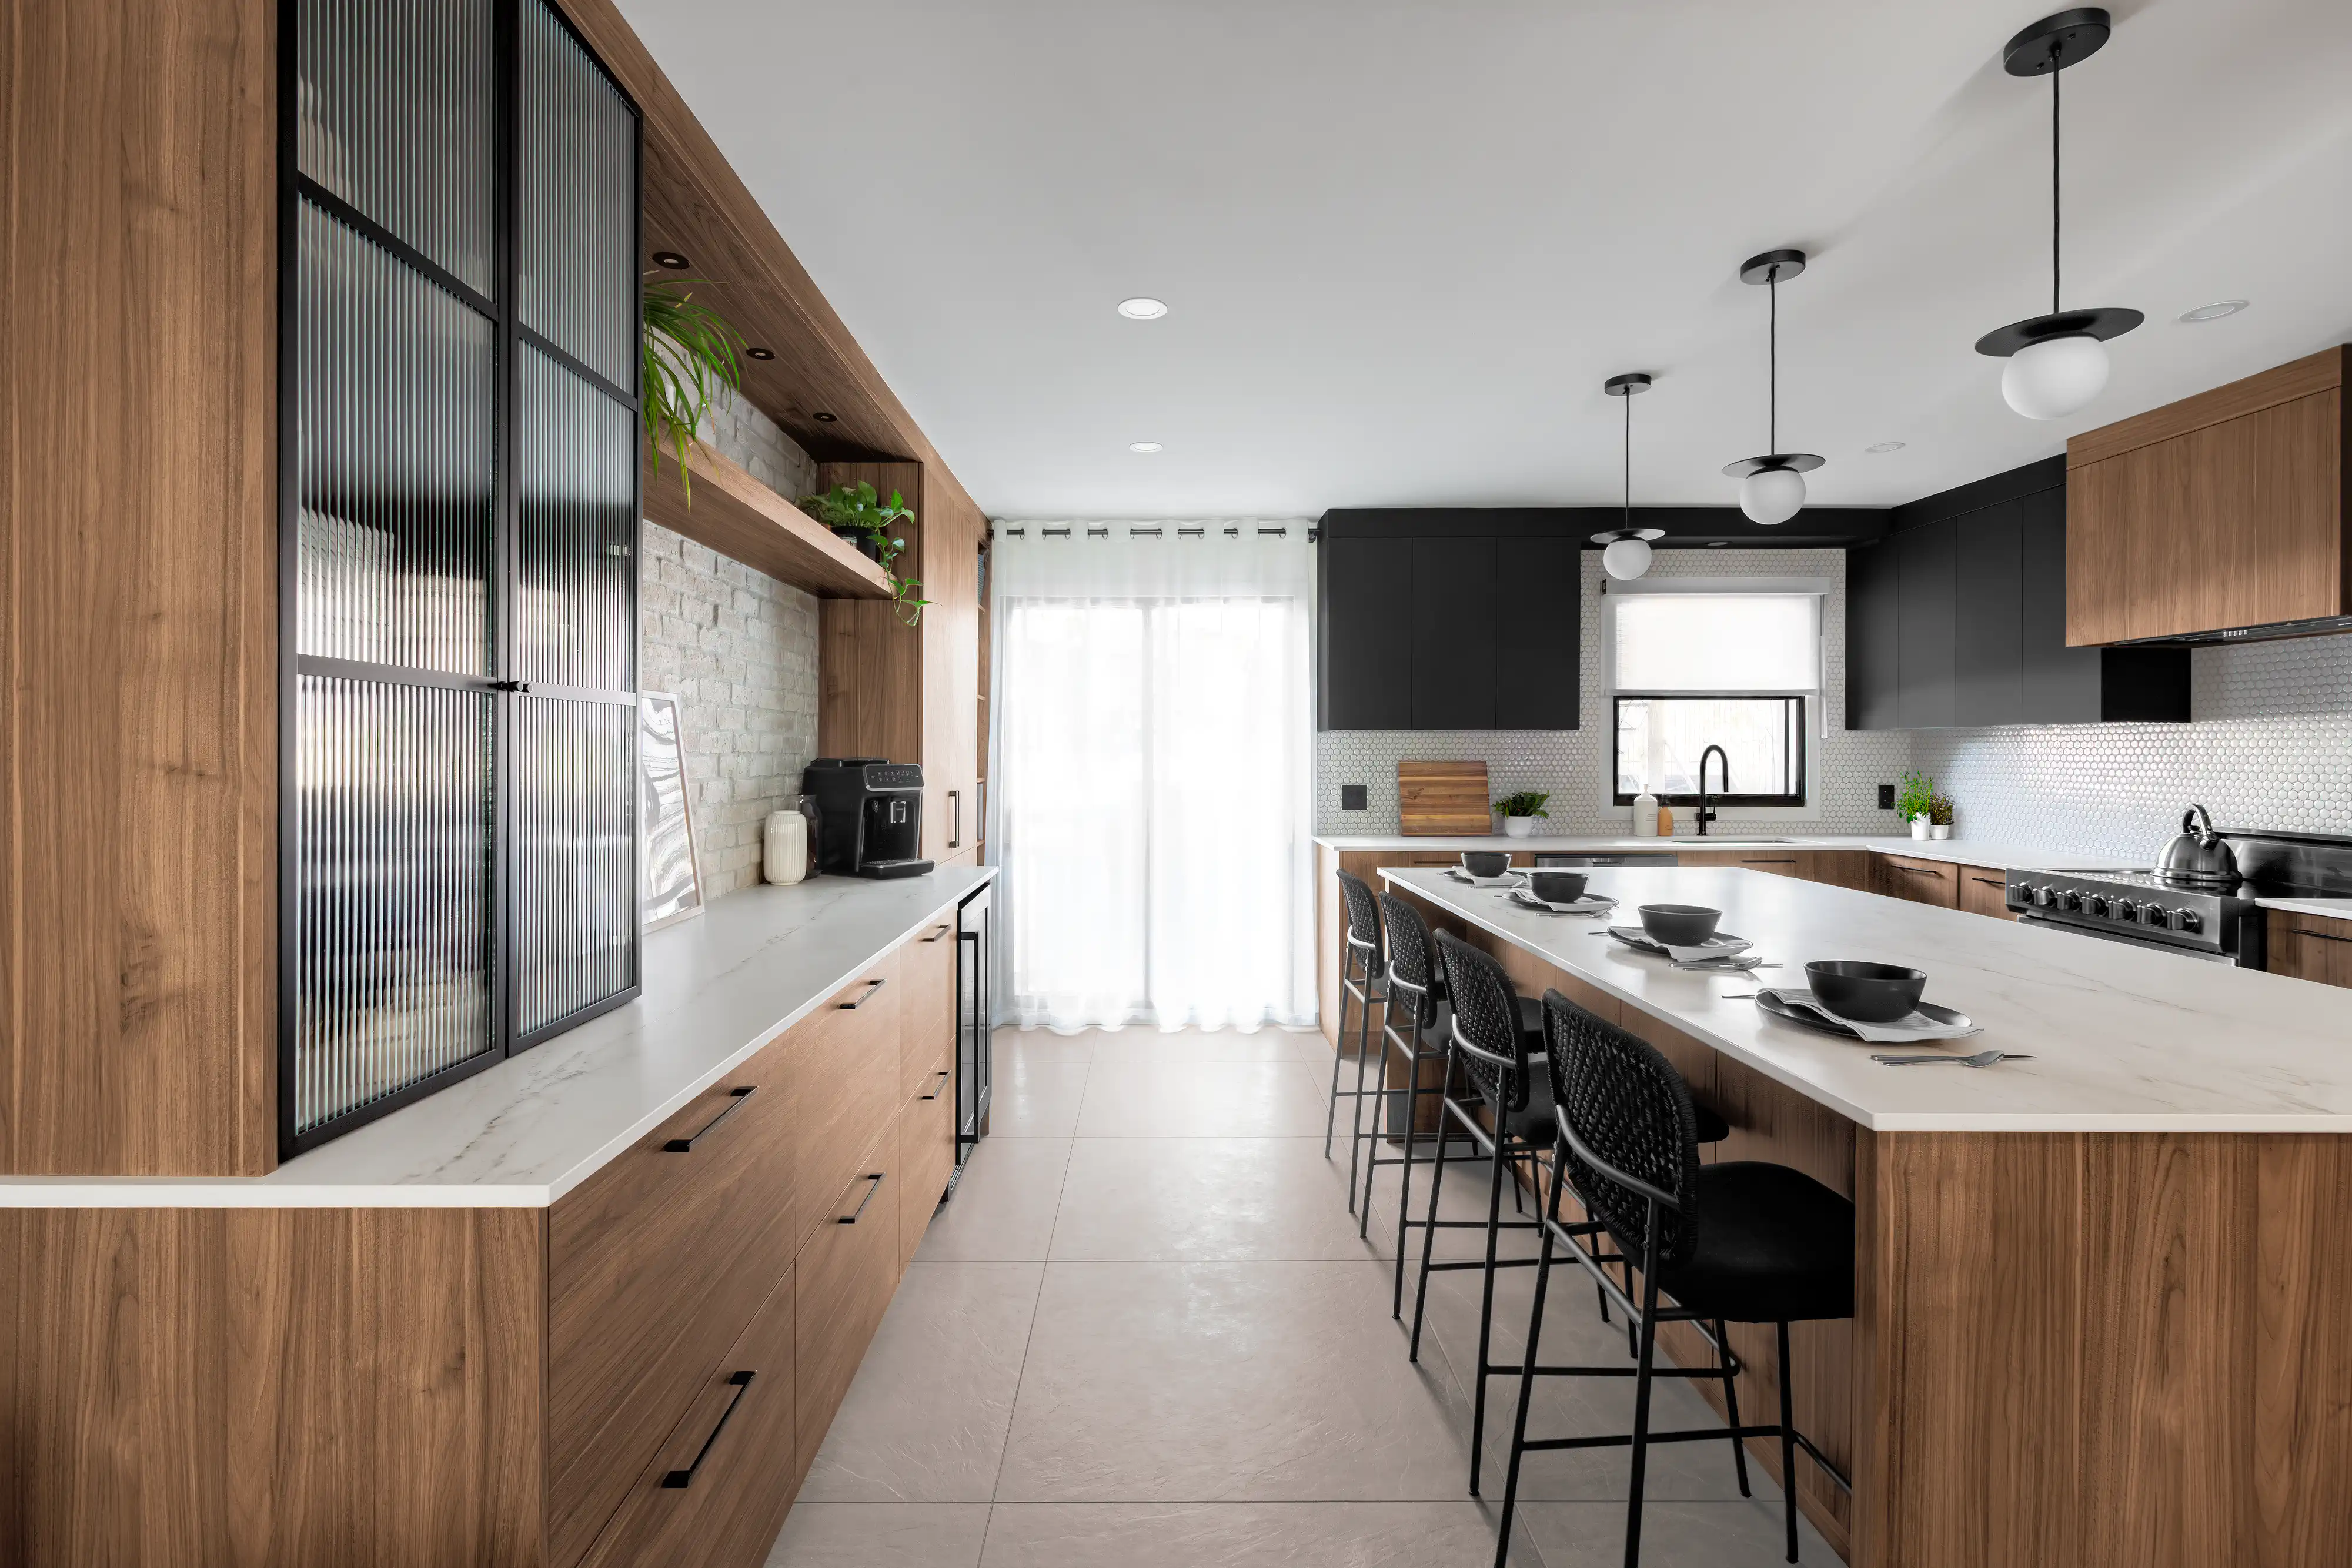 Spacious modern kitchen with wood finishes, fluted glass cabinets, and a long island countertop, interior by Sarah Brown Design